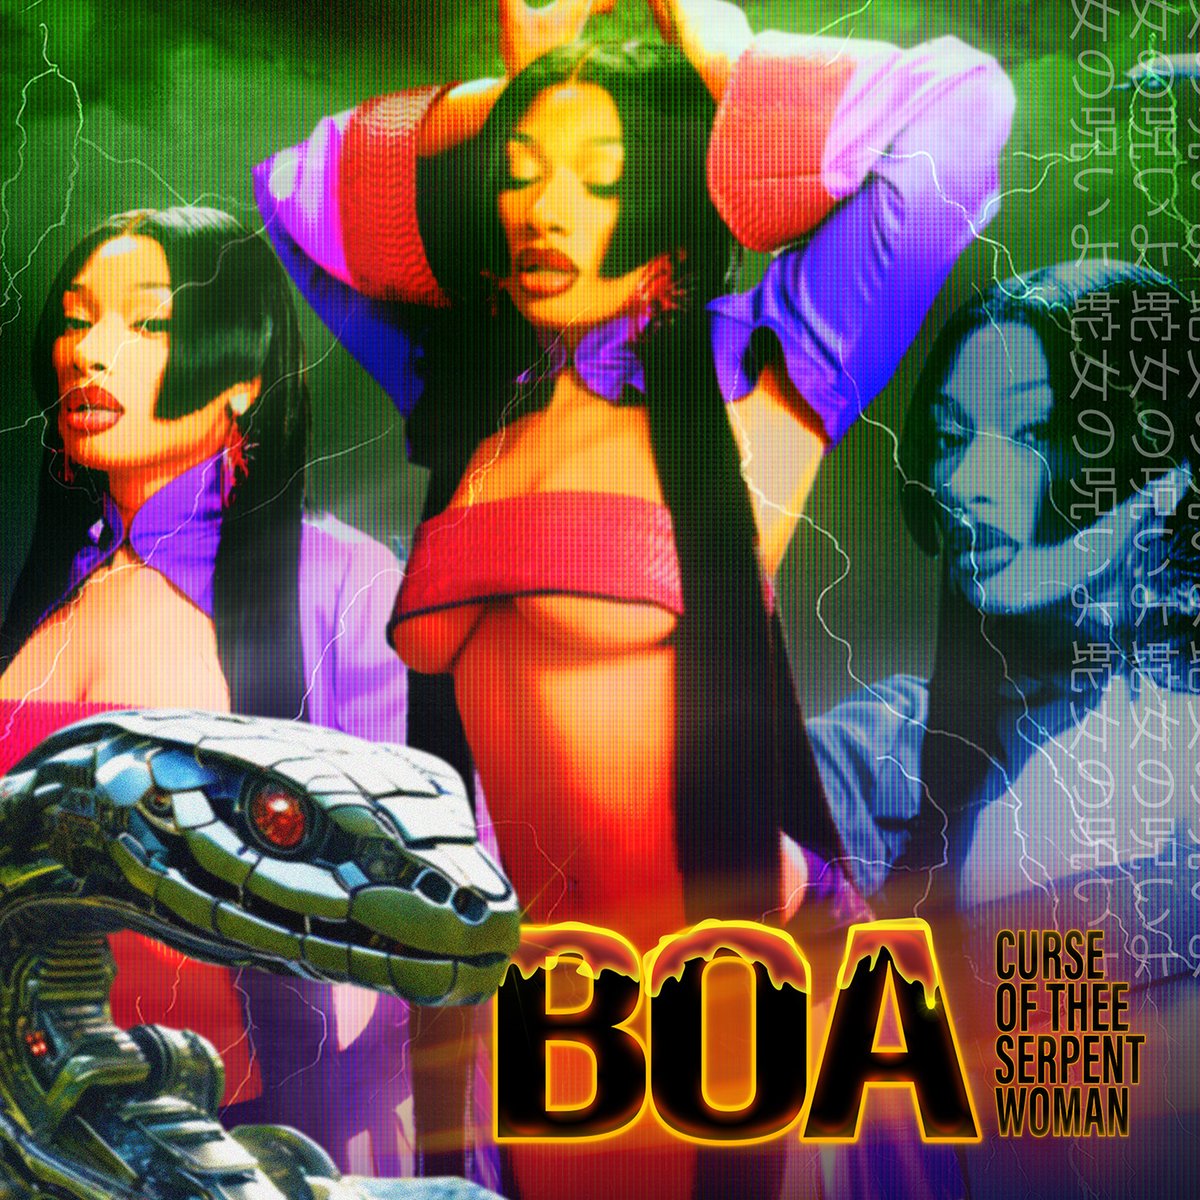 NEW MUSIC ALERT 🚨 – BOA, out now everywhere! Run it up Hotties!!! Catch @theestallion at @BallArenaDenver on June 17th on her #HOTGIRLSUMMER Tour with special guest: @GloTheofficial! Don't miss out: livemu.sc/491oOhM